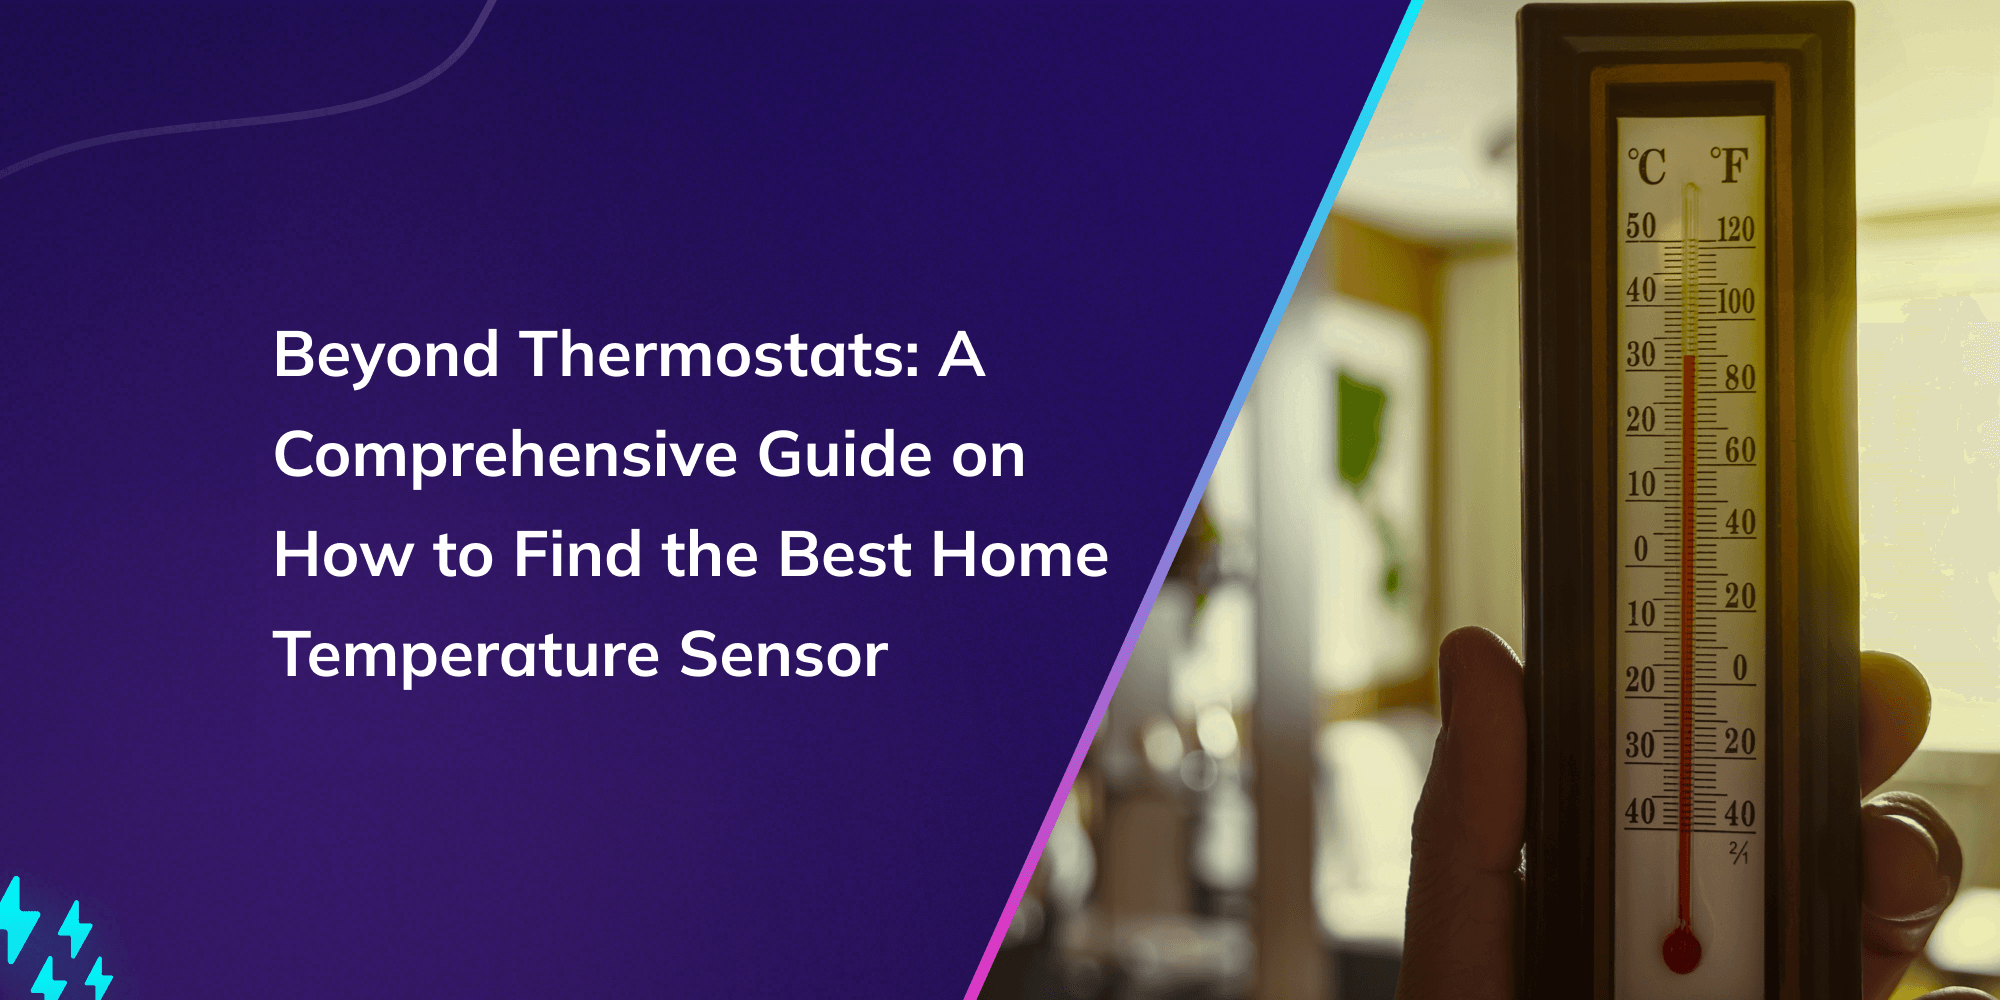 Beyond Thermostats: A Comprehensive Guide on How to Find the Best Home Temperature Sensor